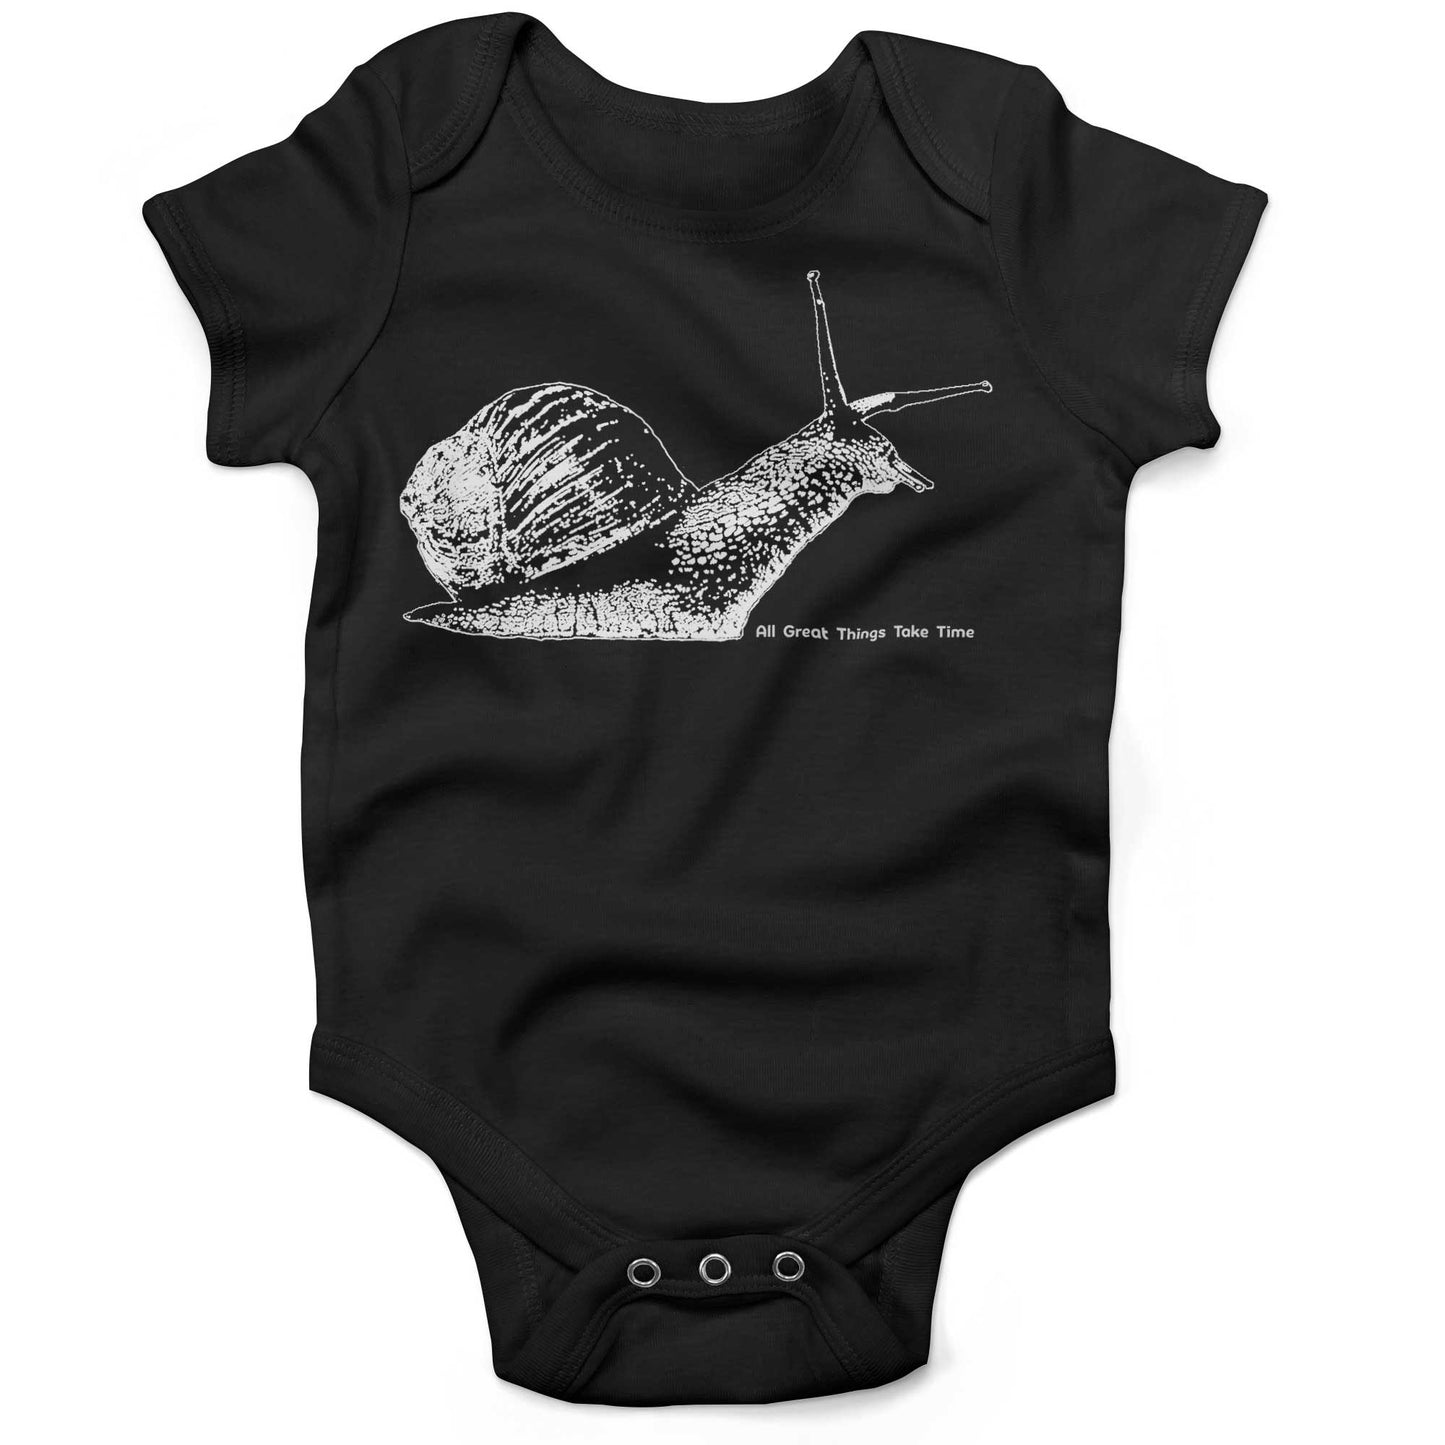 All Great Things Take Time Baby One Piece-Organic Black-3-6 months